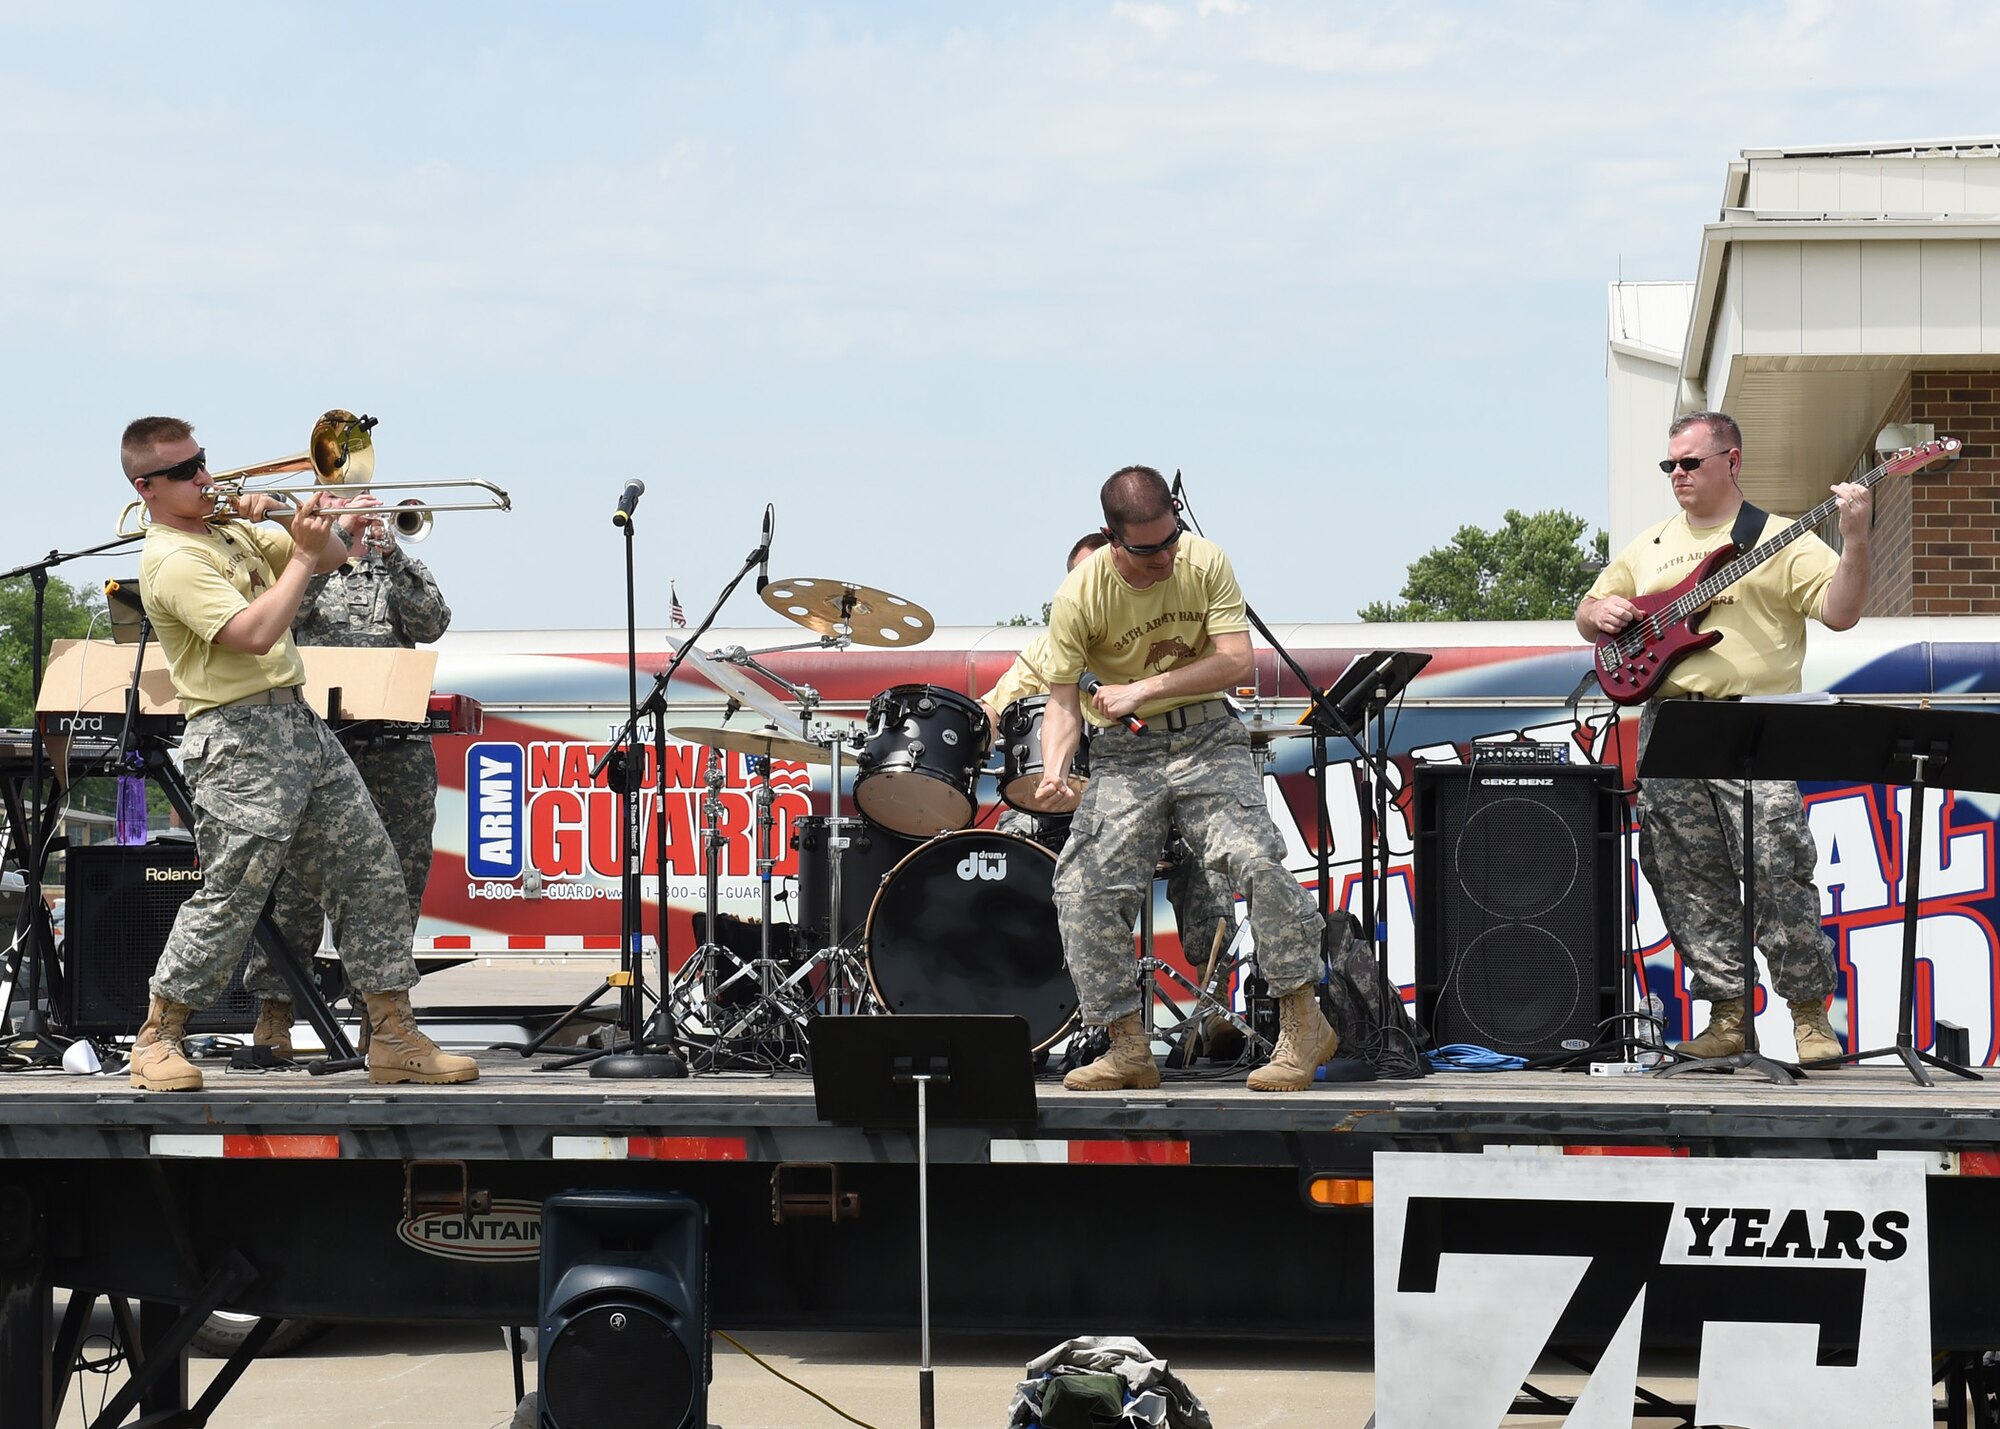 Current members and alumni of the 132d Wing participate in the wing's 75th Anniversary celebration June 11, 2016, at the 132d Wing in Des Moines, Iowa. The celebration featured aircraft displays, bouncey houses, The Sidewinders Army Band and numerous vendors. (U.S. Air National Guard photo by Staff Sgt. Michael J. Kelly/Released)